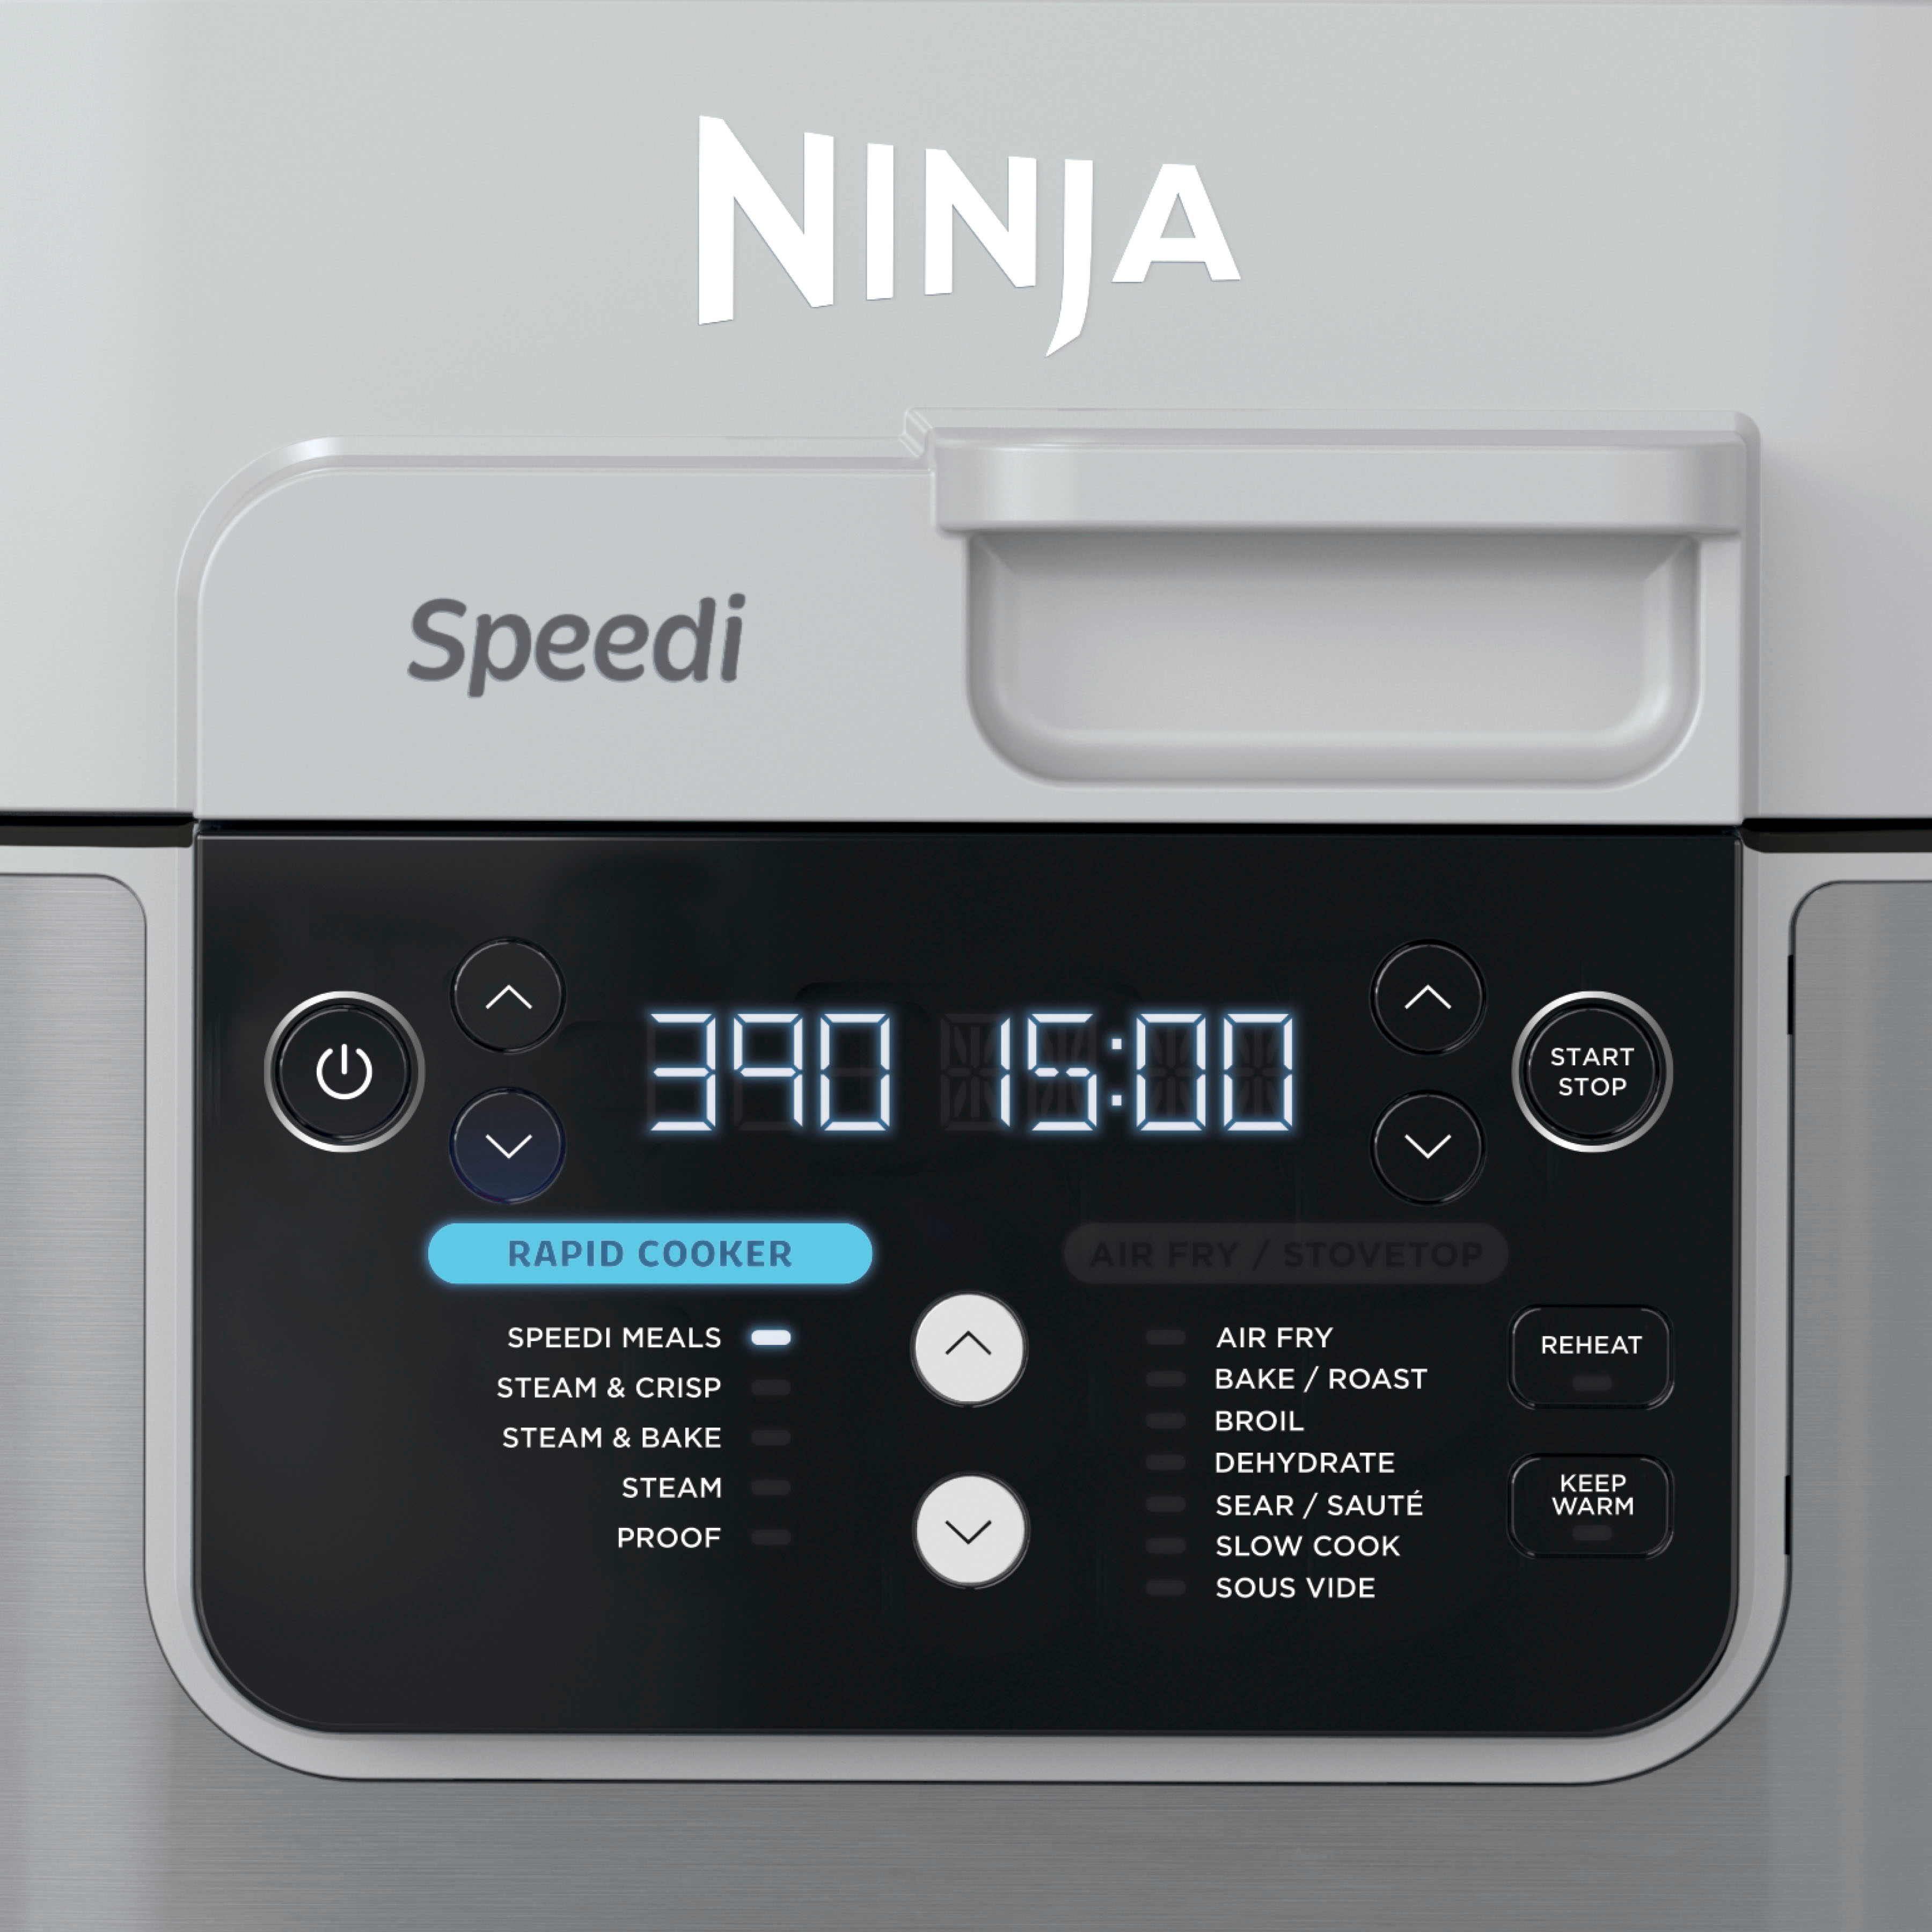 Angle View: Ninja - Speedi Rapid Cooker & Air Fryer, 6-QT Capacity, 12-in-1 Functionality, 15-Minute Meals All In One Pot - Light Gray